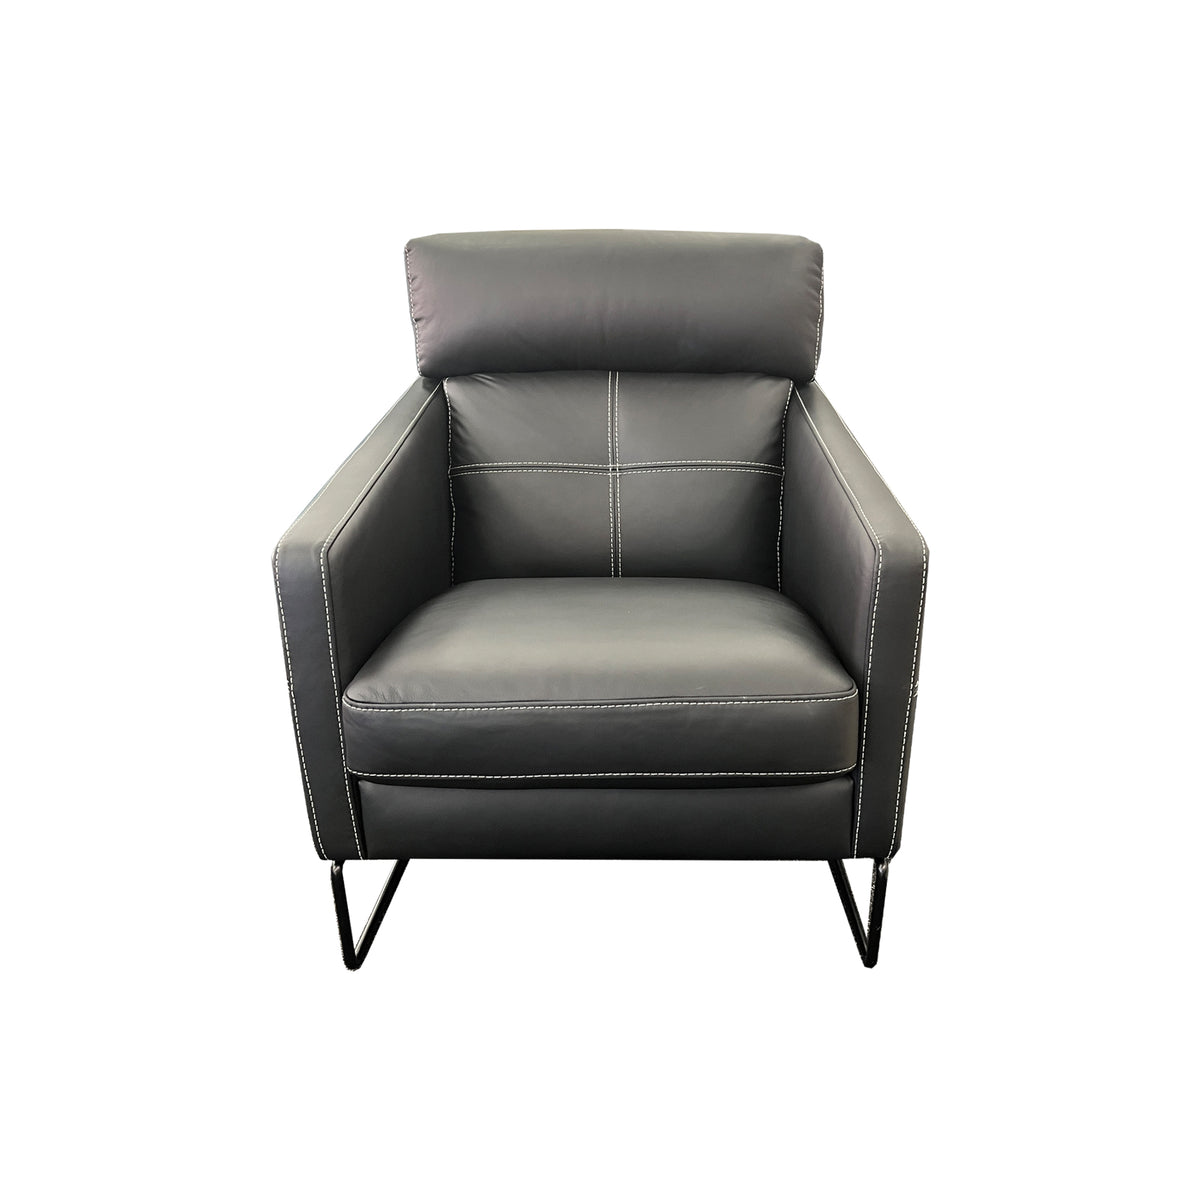 Frenzo Atollo Black Leather Occasional Chair with white top-stitching